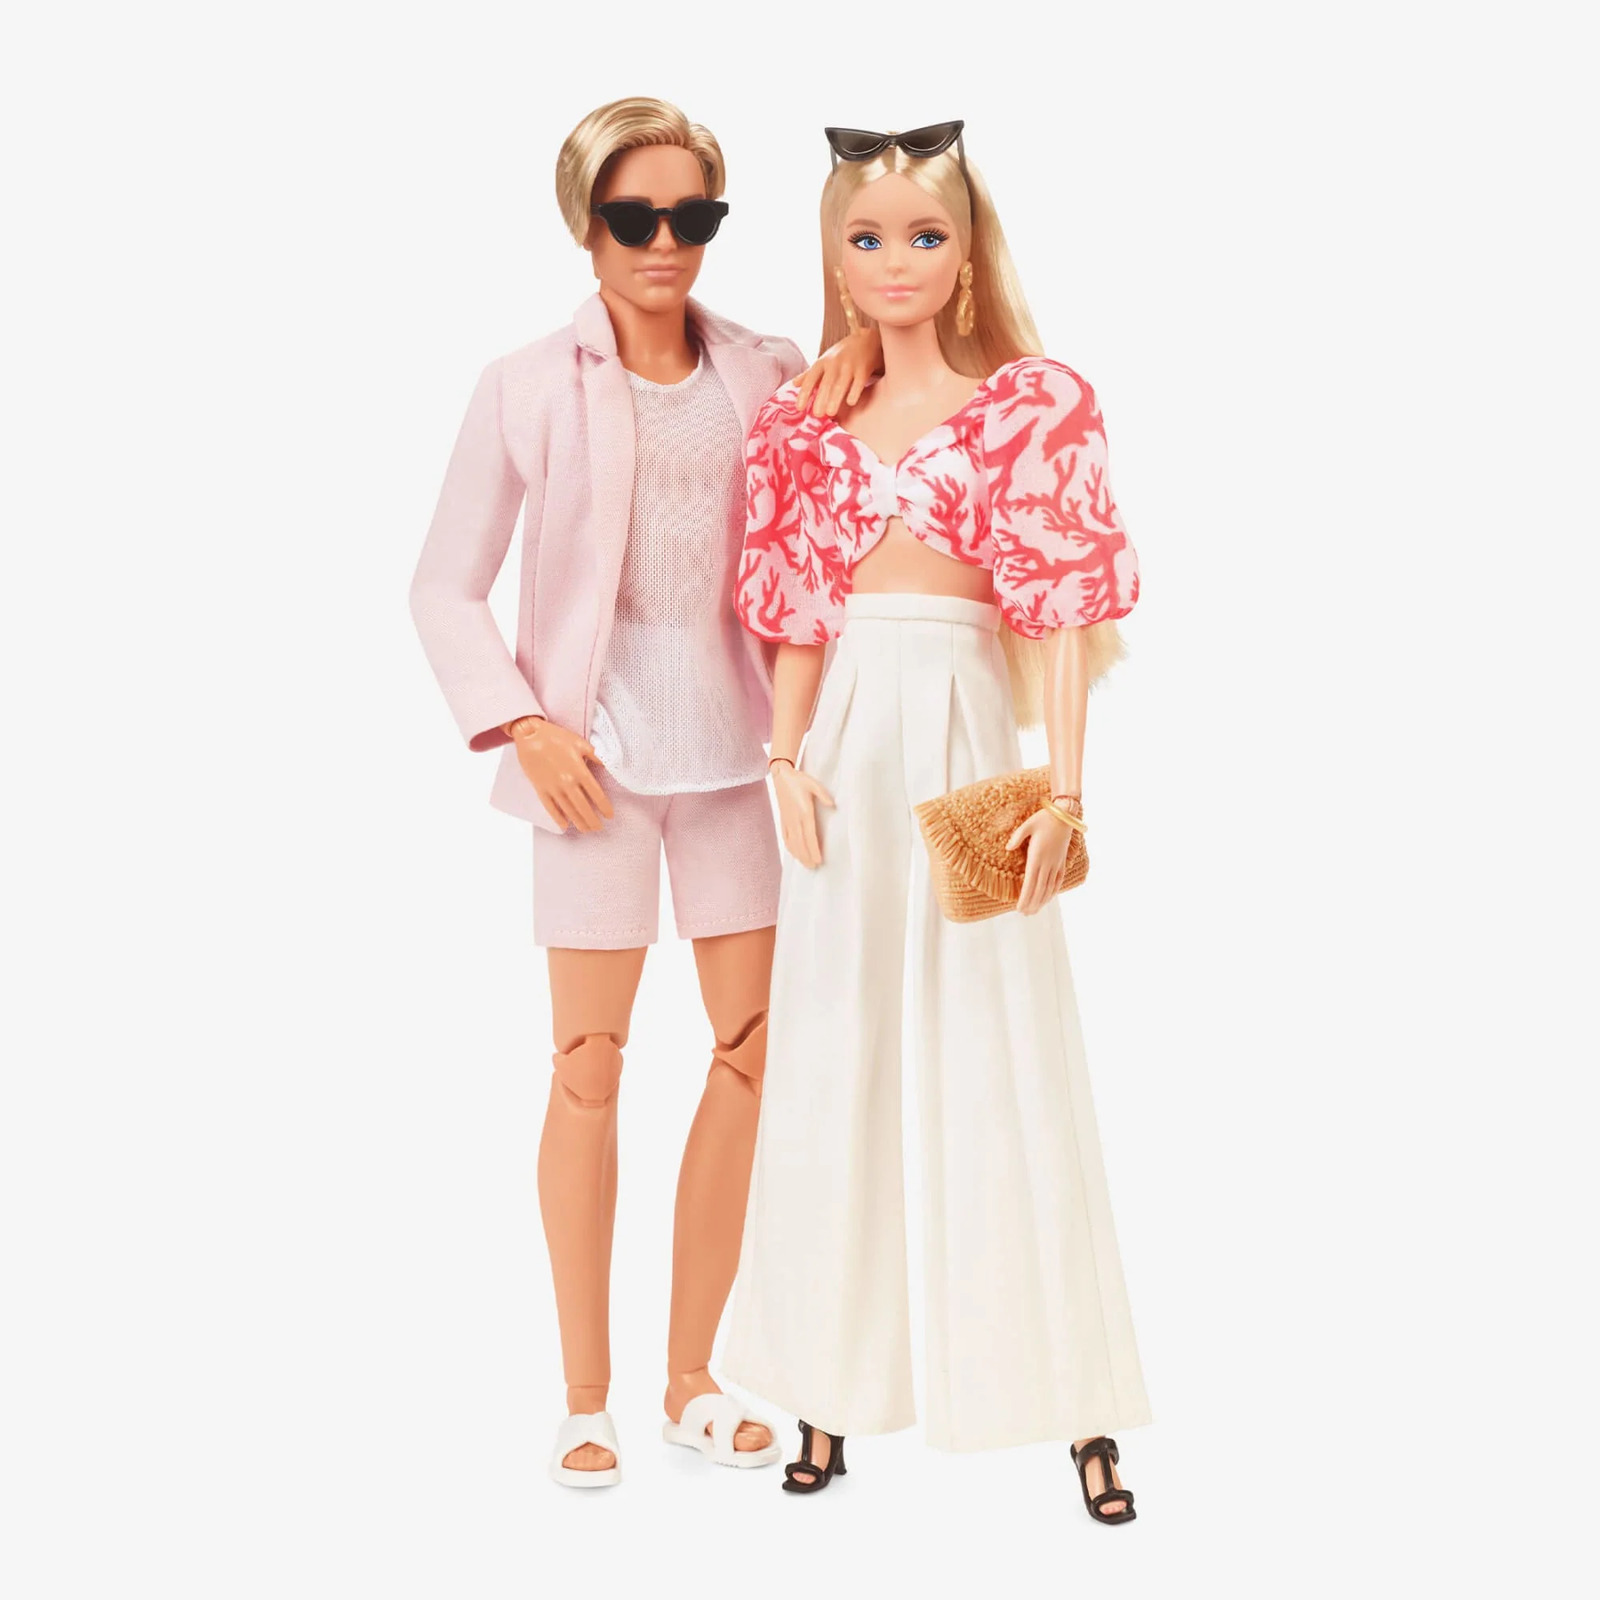 Fashion Duo Dolls @Barbiestyle, Barbie And Ken Doll Two-Pack Resort-Wear Fashion